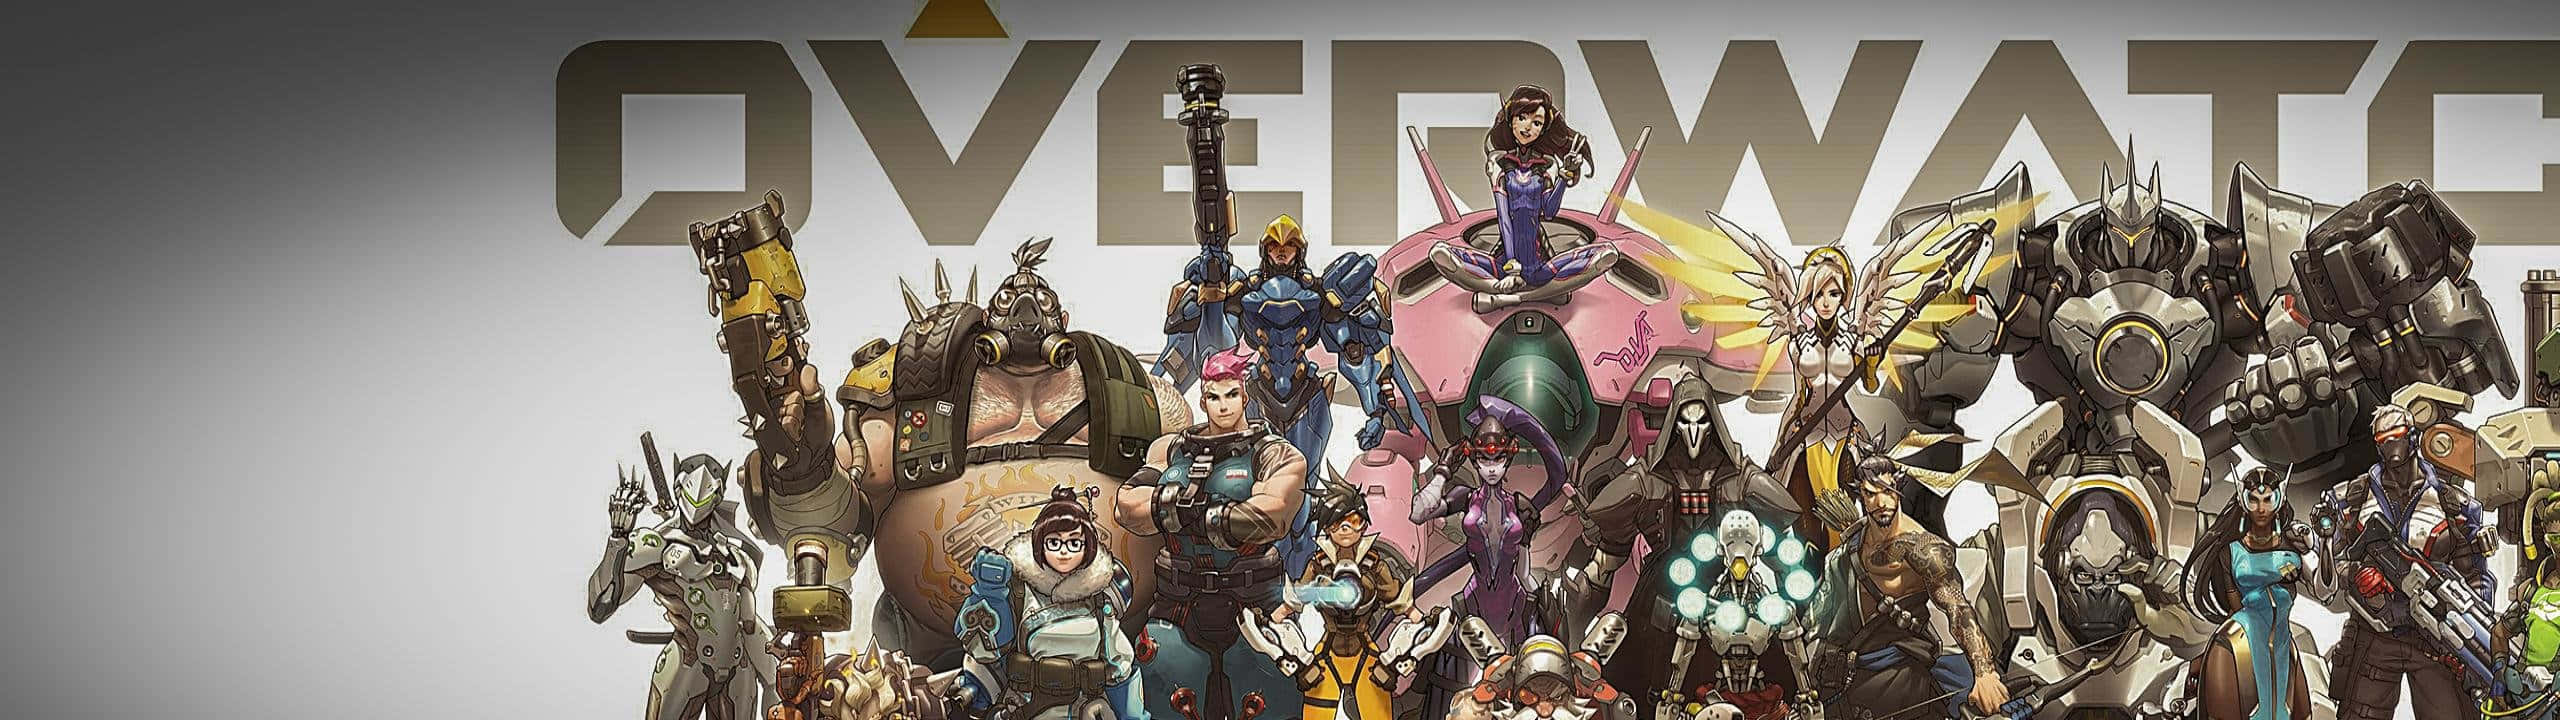 Overwatch Characters Dual Wallpaper